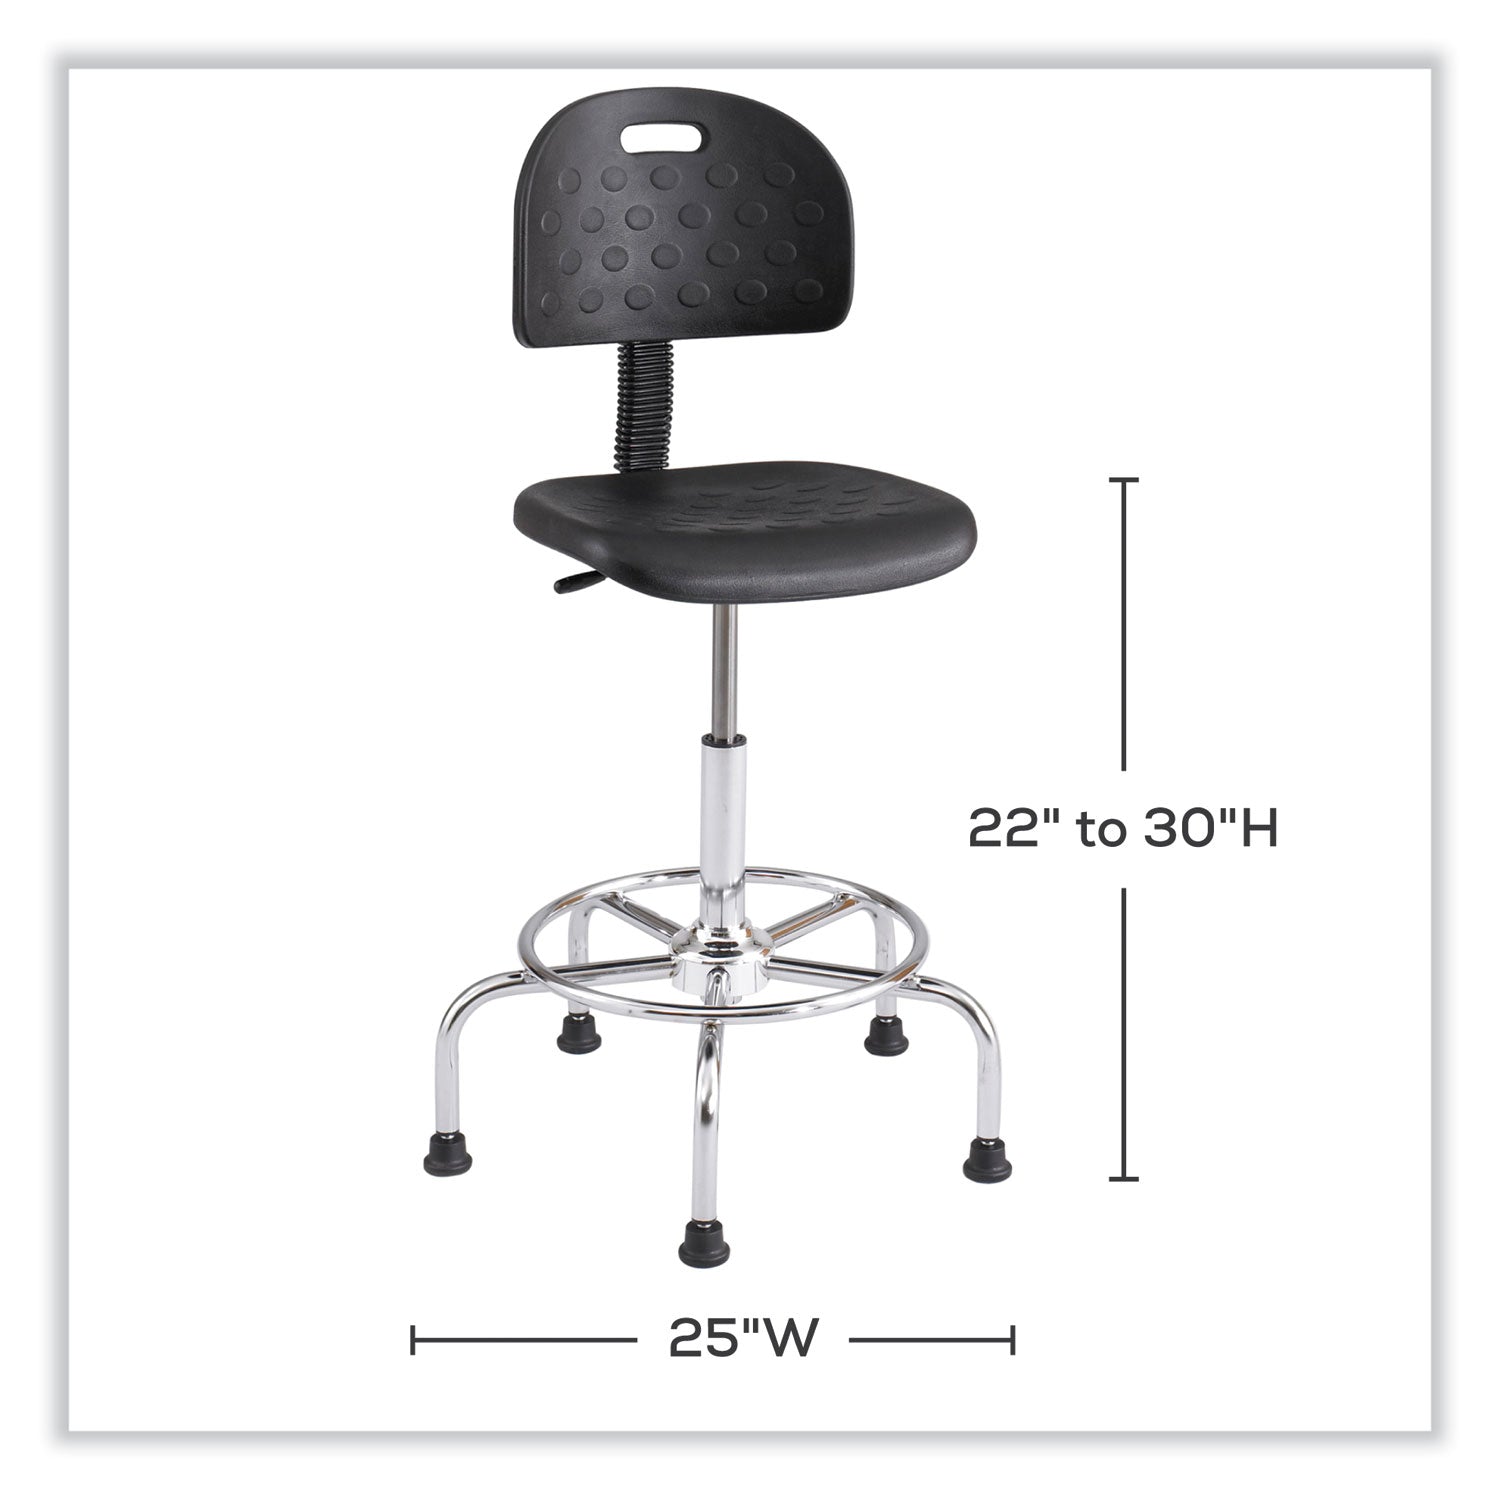 workfit-economy-industrial-chair-up-to-400-lb-22-to-30-high-black-seat-back-silver-base-ships-in-1-3-business-days_saf6950bl - 3